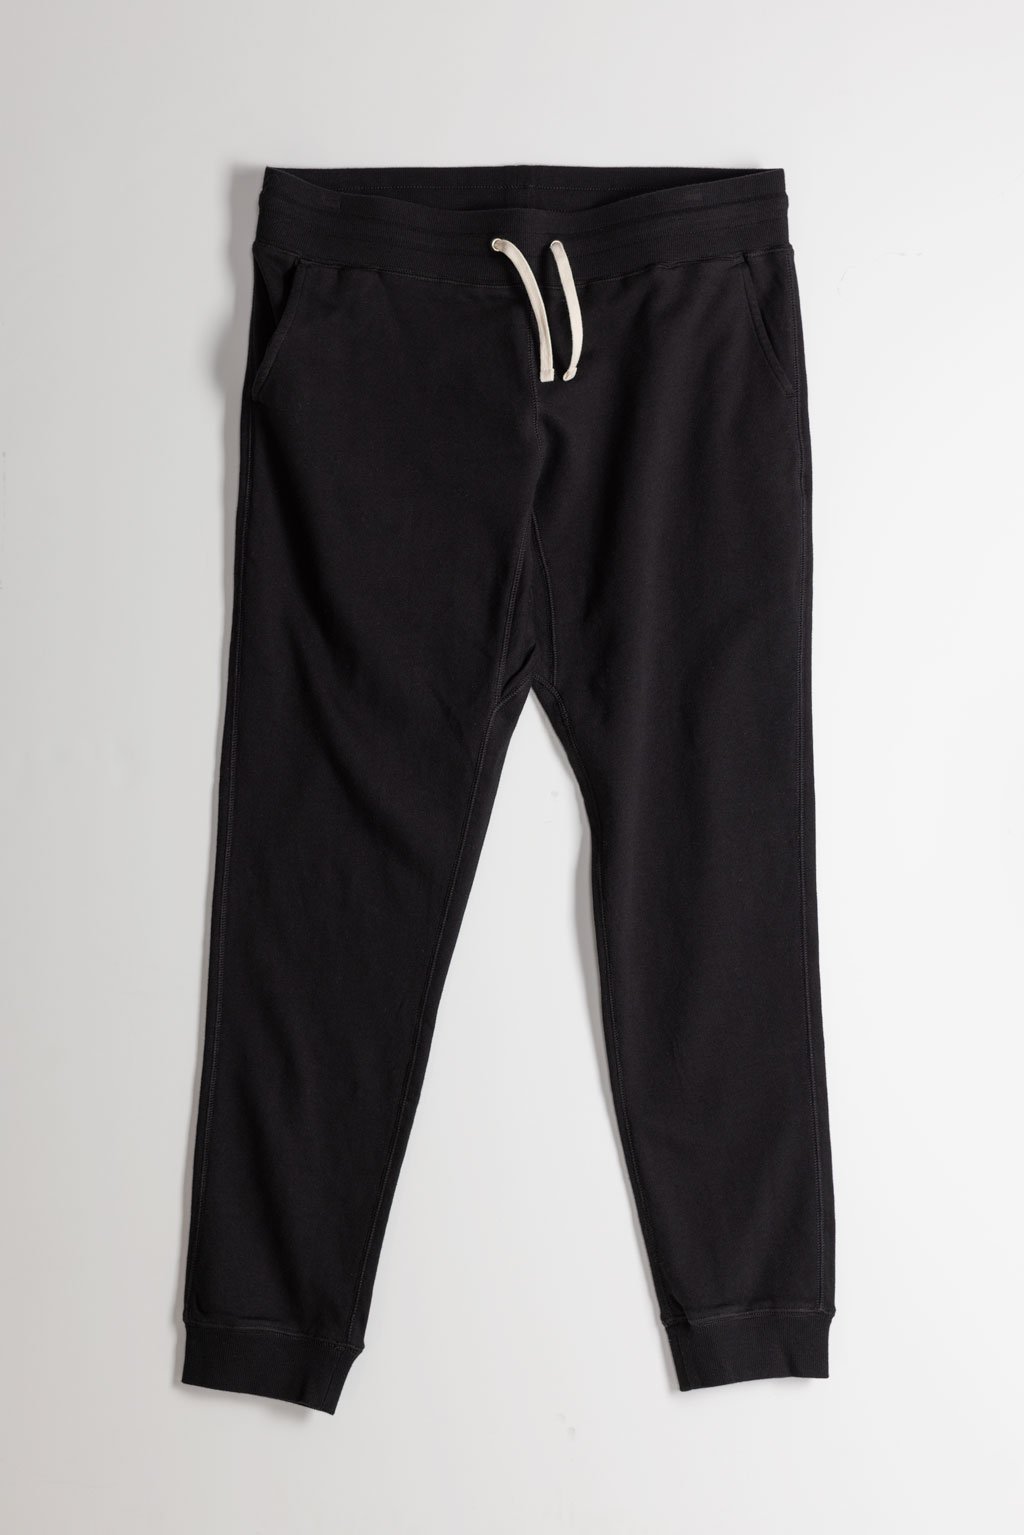 NS2167-1 250g French Terry Sweatpants in Black – National Standards